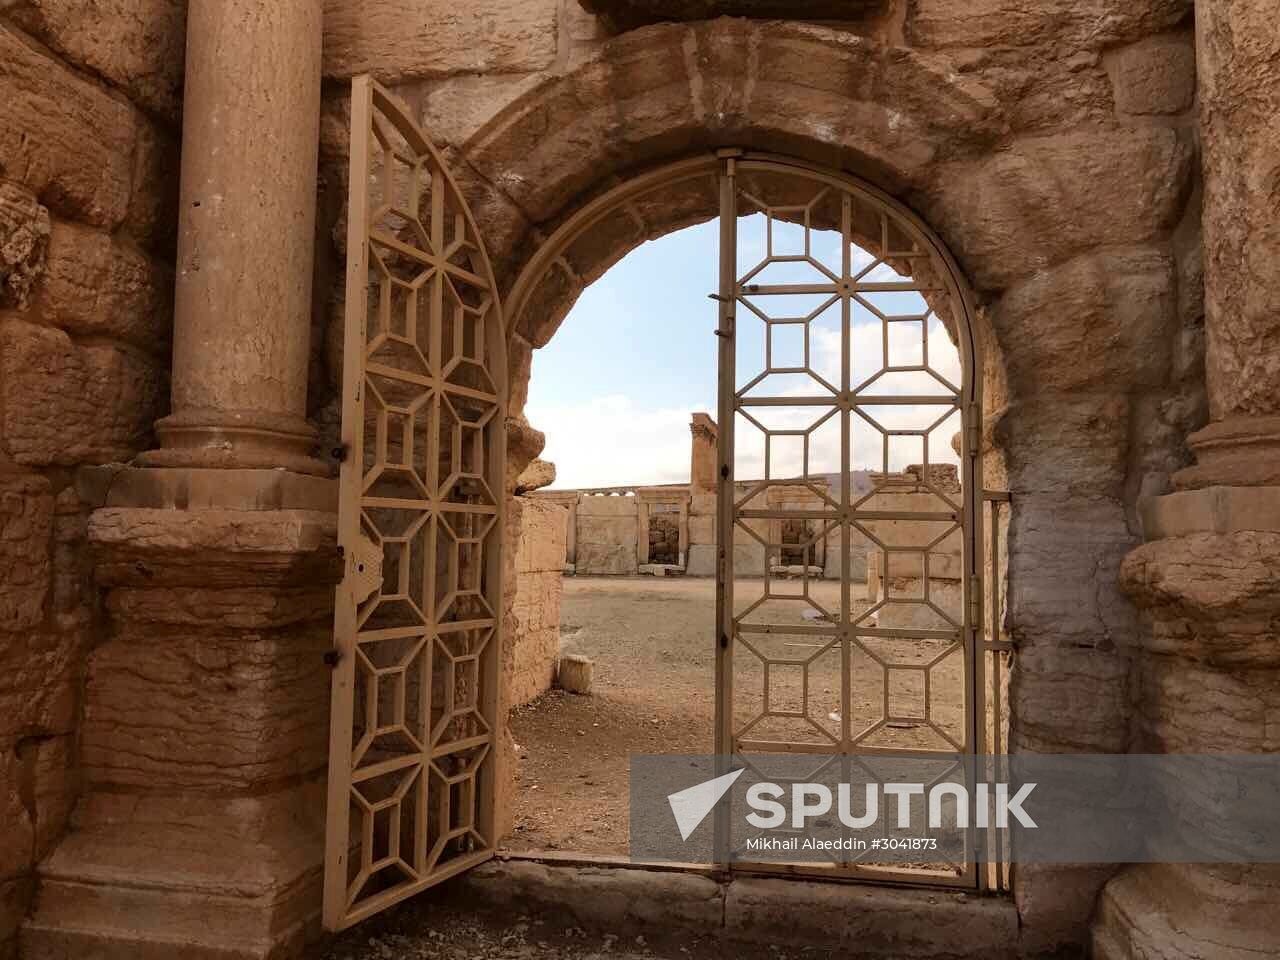 Palmyra recaptured by Syrian Arab Republic forces backed by Russian Aerospace Force